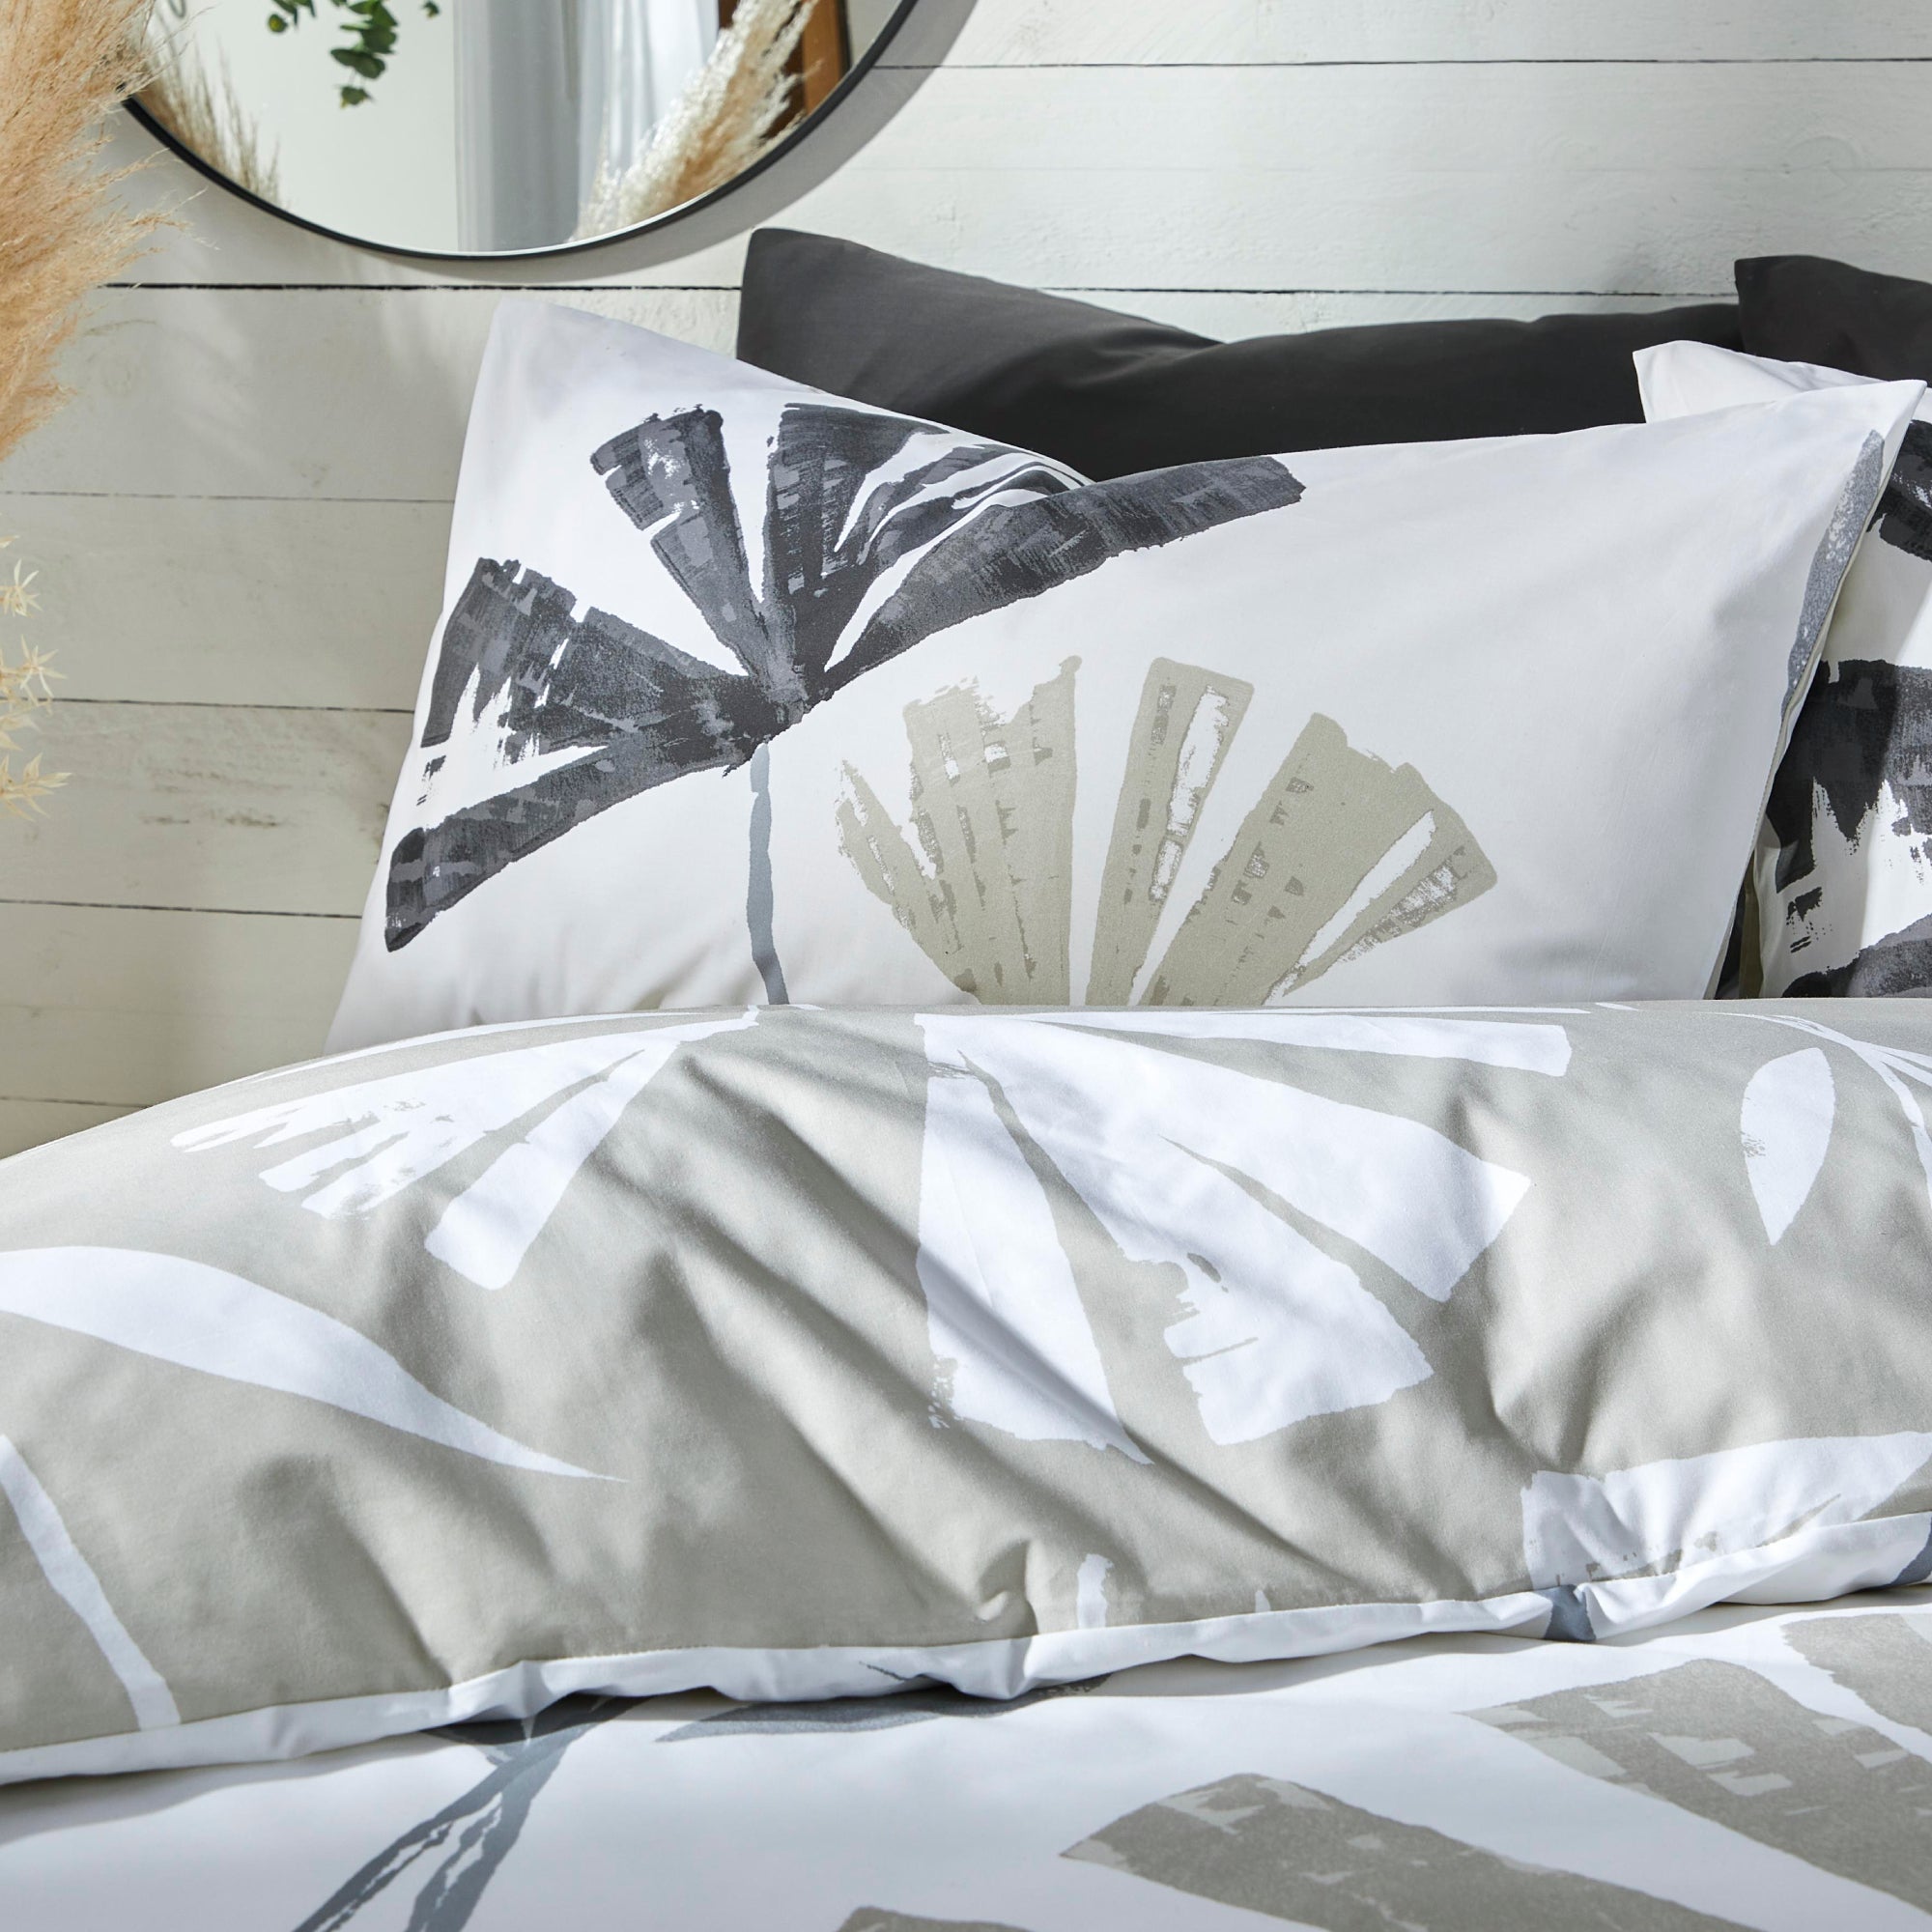 Duvet Cover Set Alma by Fusion in Natural